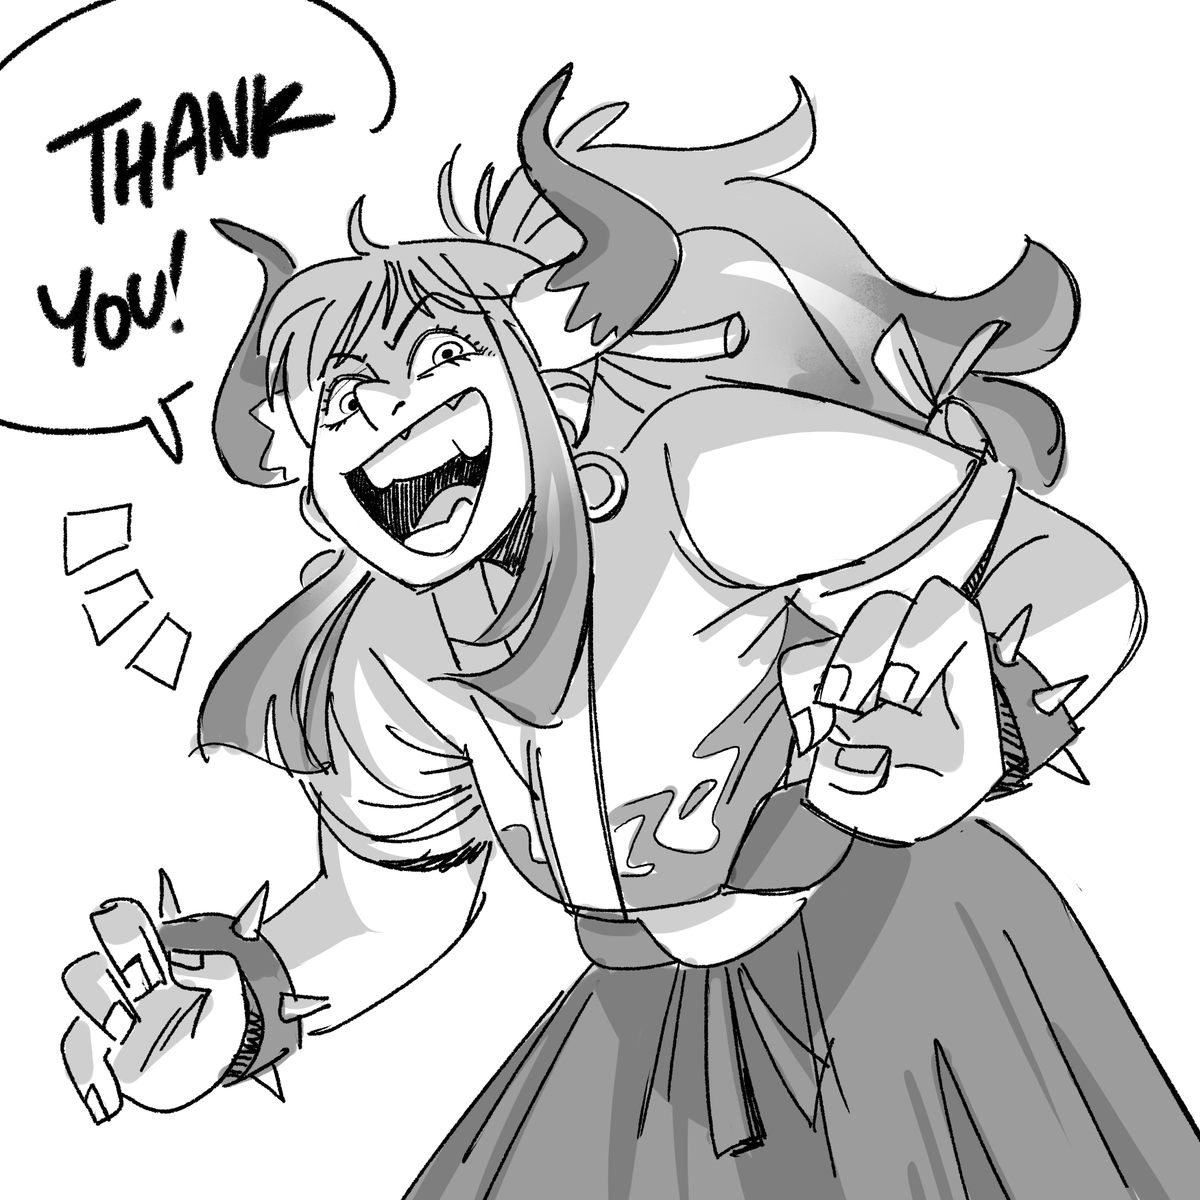 glad y'all liked my silly comic! here. take this yamato as a token of gratitude